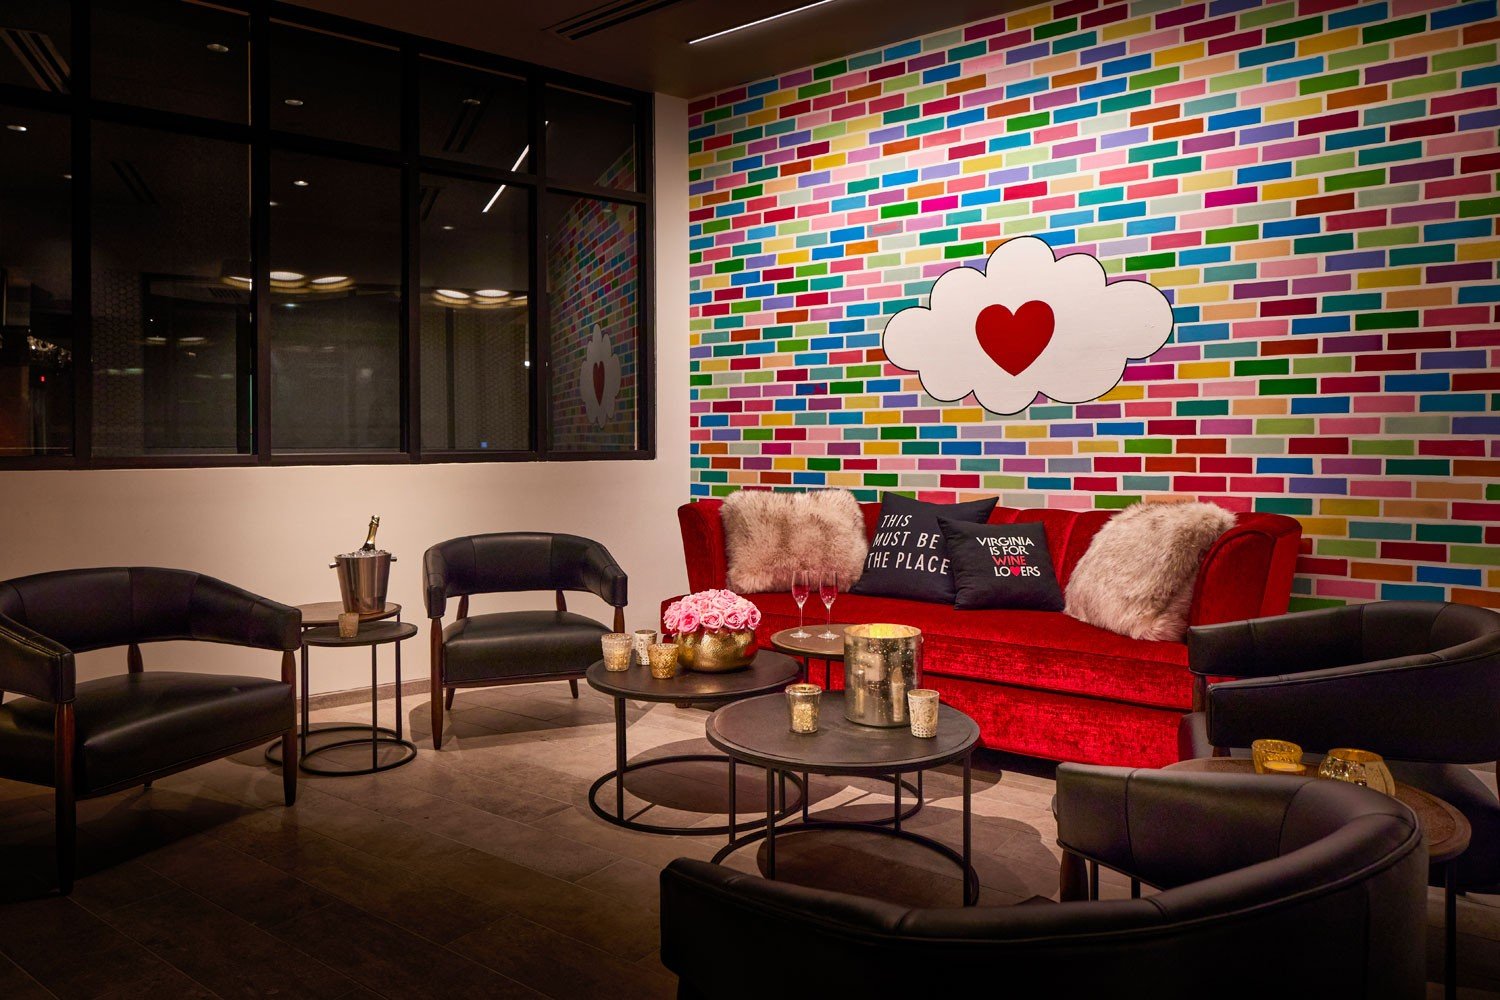 Archer Hotel Tysons - The heart decorated wall mural at AKB restaurant